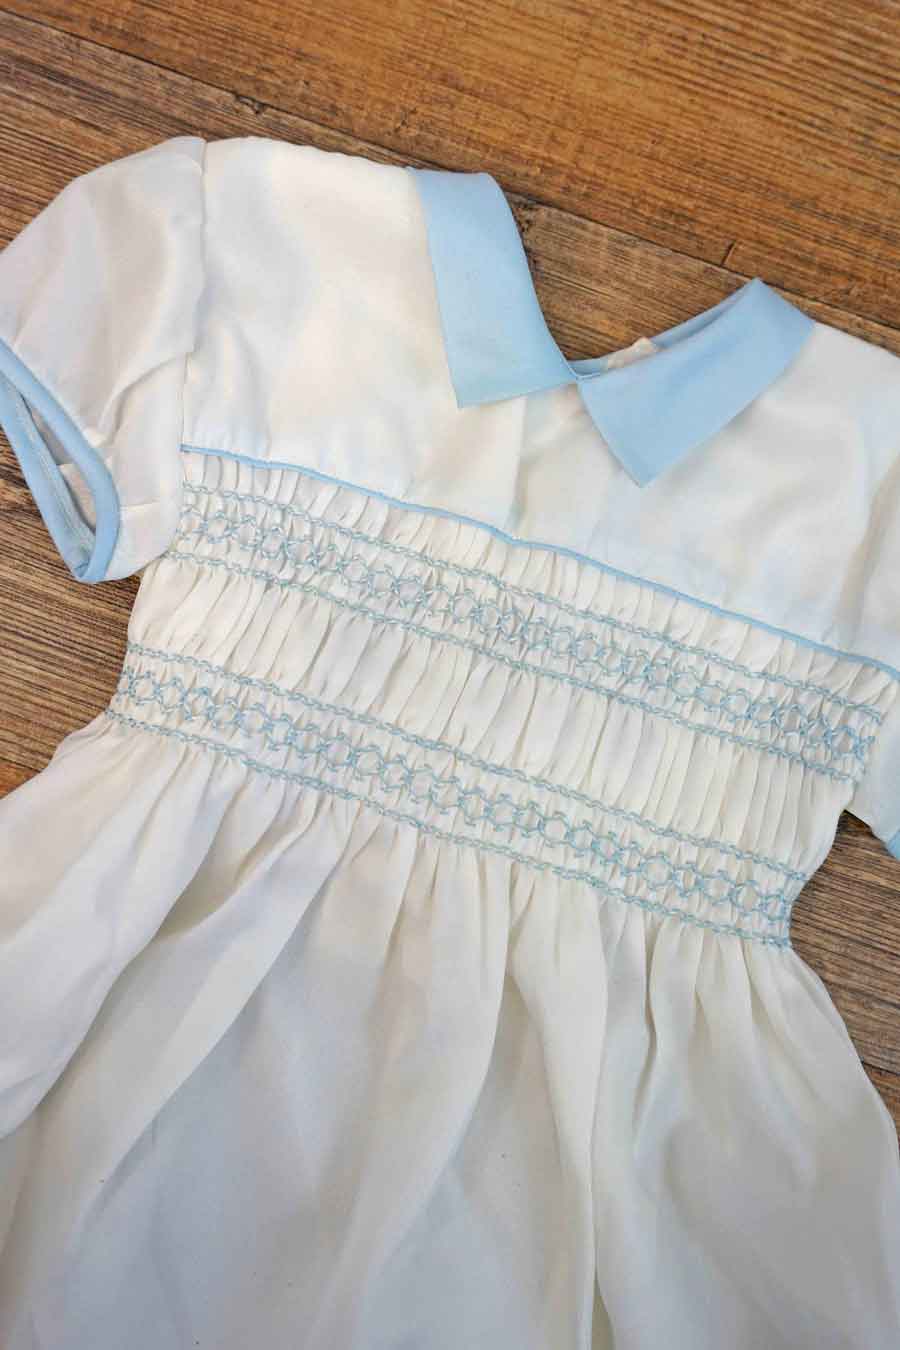 Vintage 1950s Boys Baptism Outfit